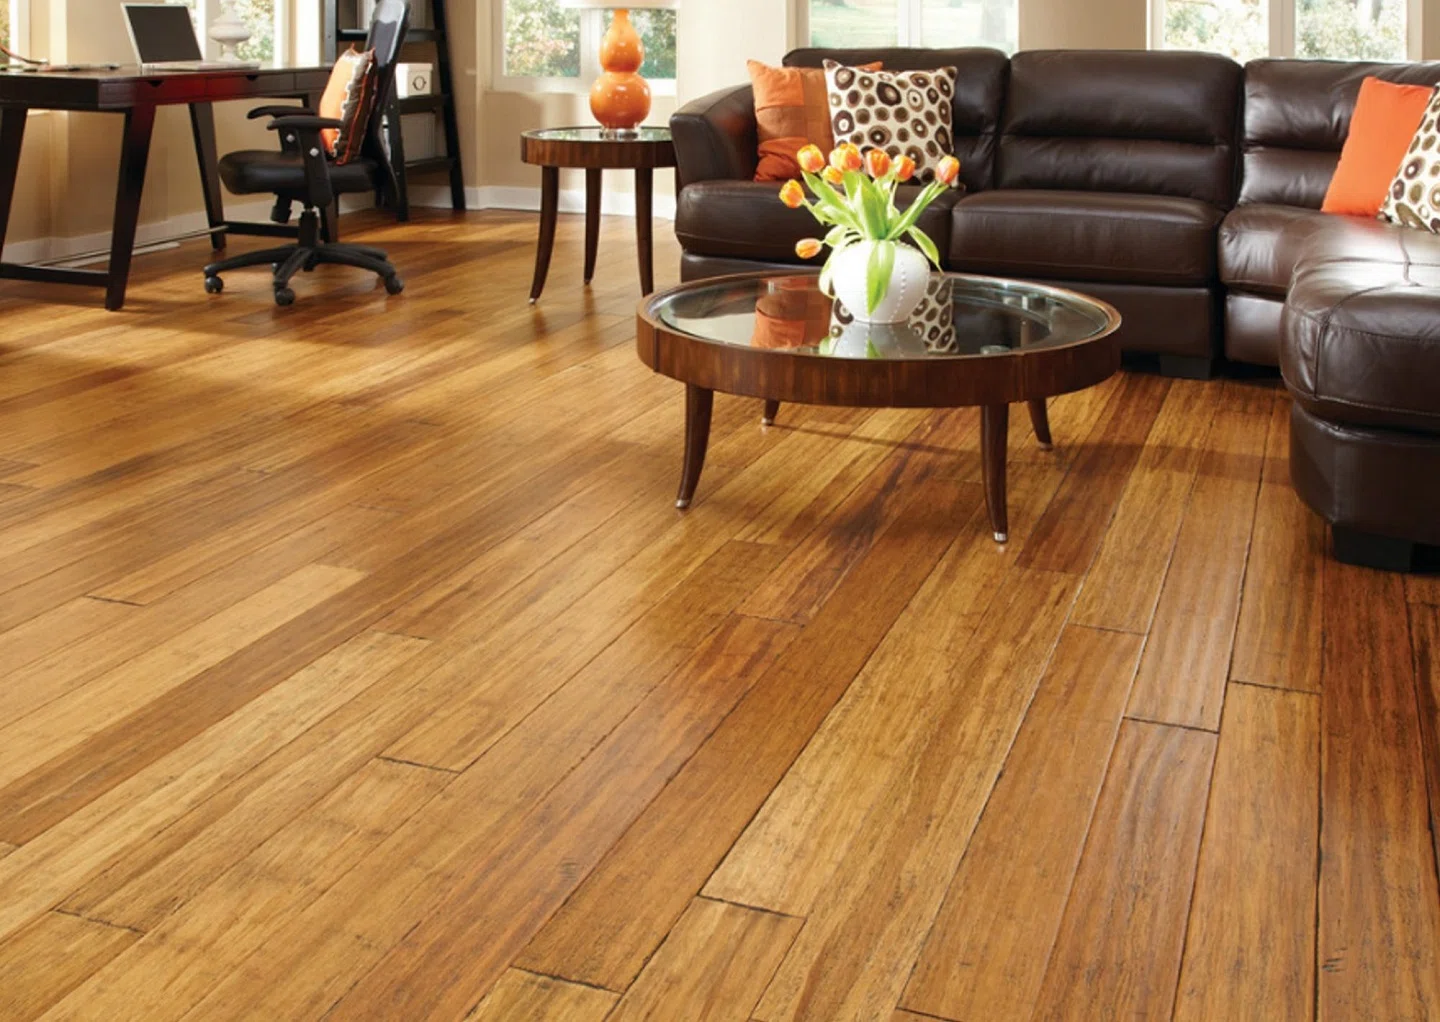 The Eco-friendly Option of Bamboo Flooring